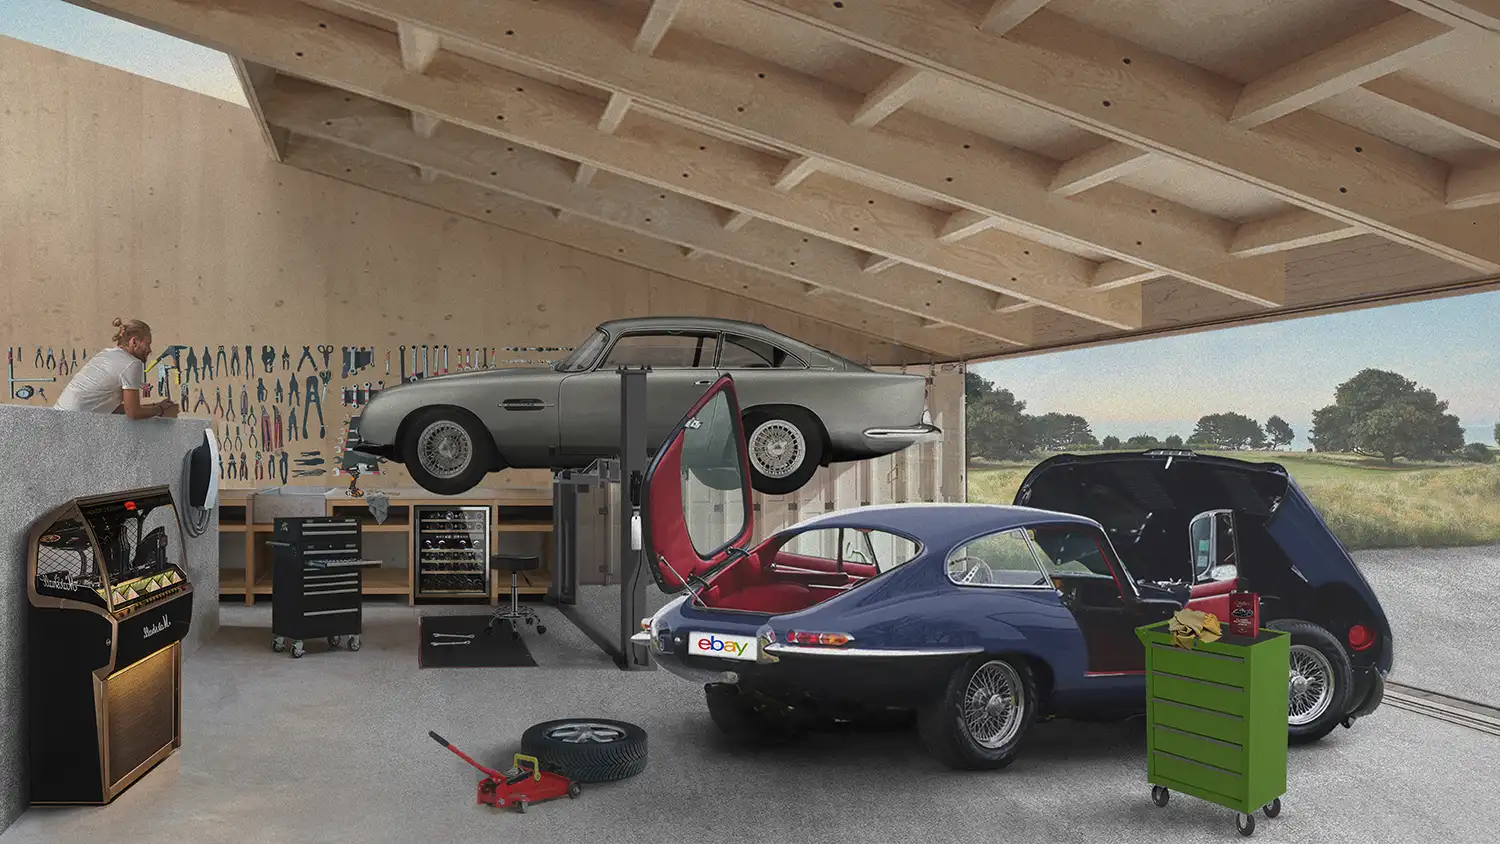 eBay reveals the ultimate garage, as more than half of motorists admit they would consider moving house if it came with the “perfect garage”